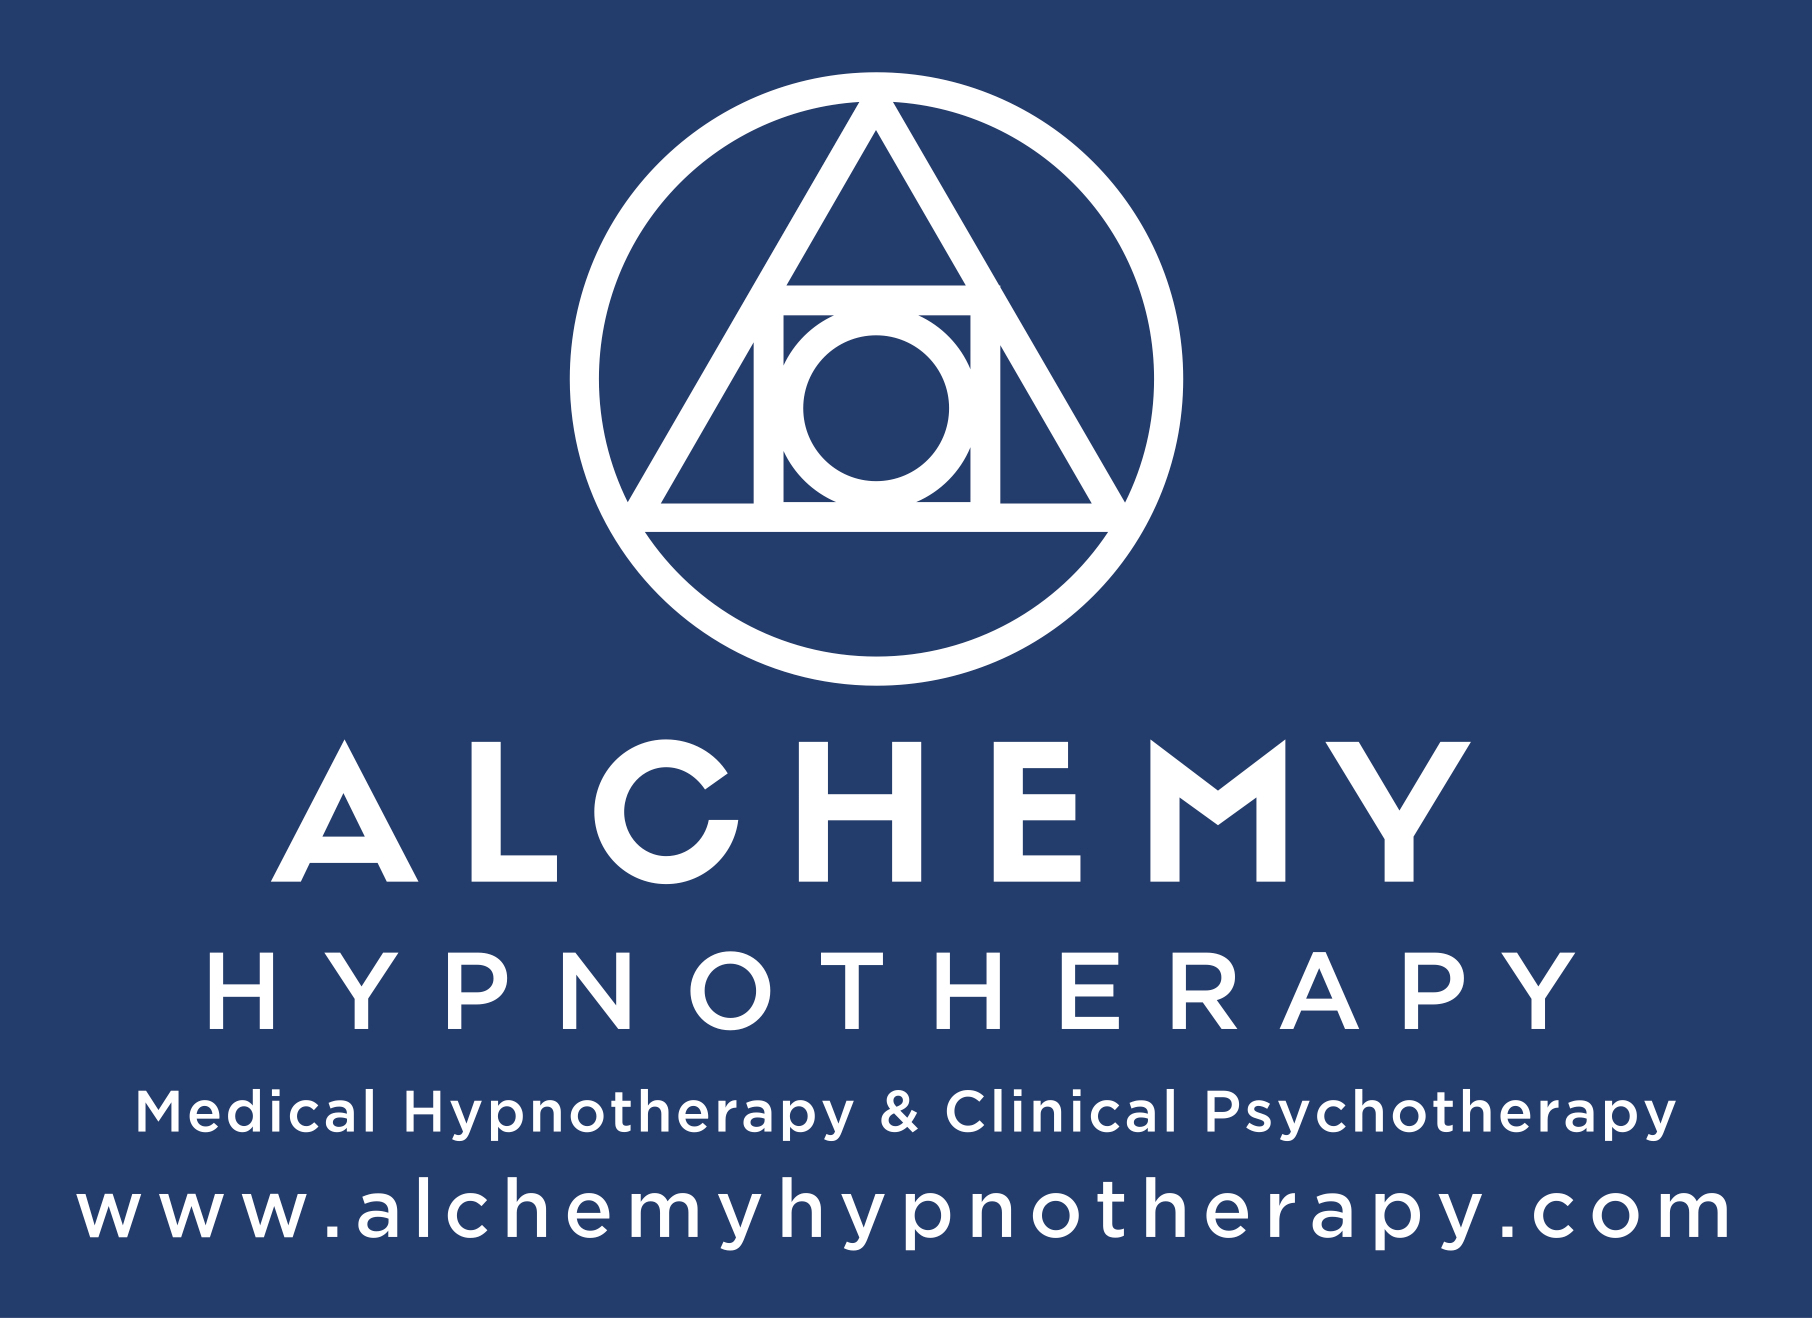 This is a picture of the Alchemy Hypnotherapy logo, white on blue background.